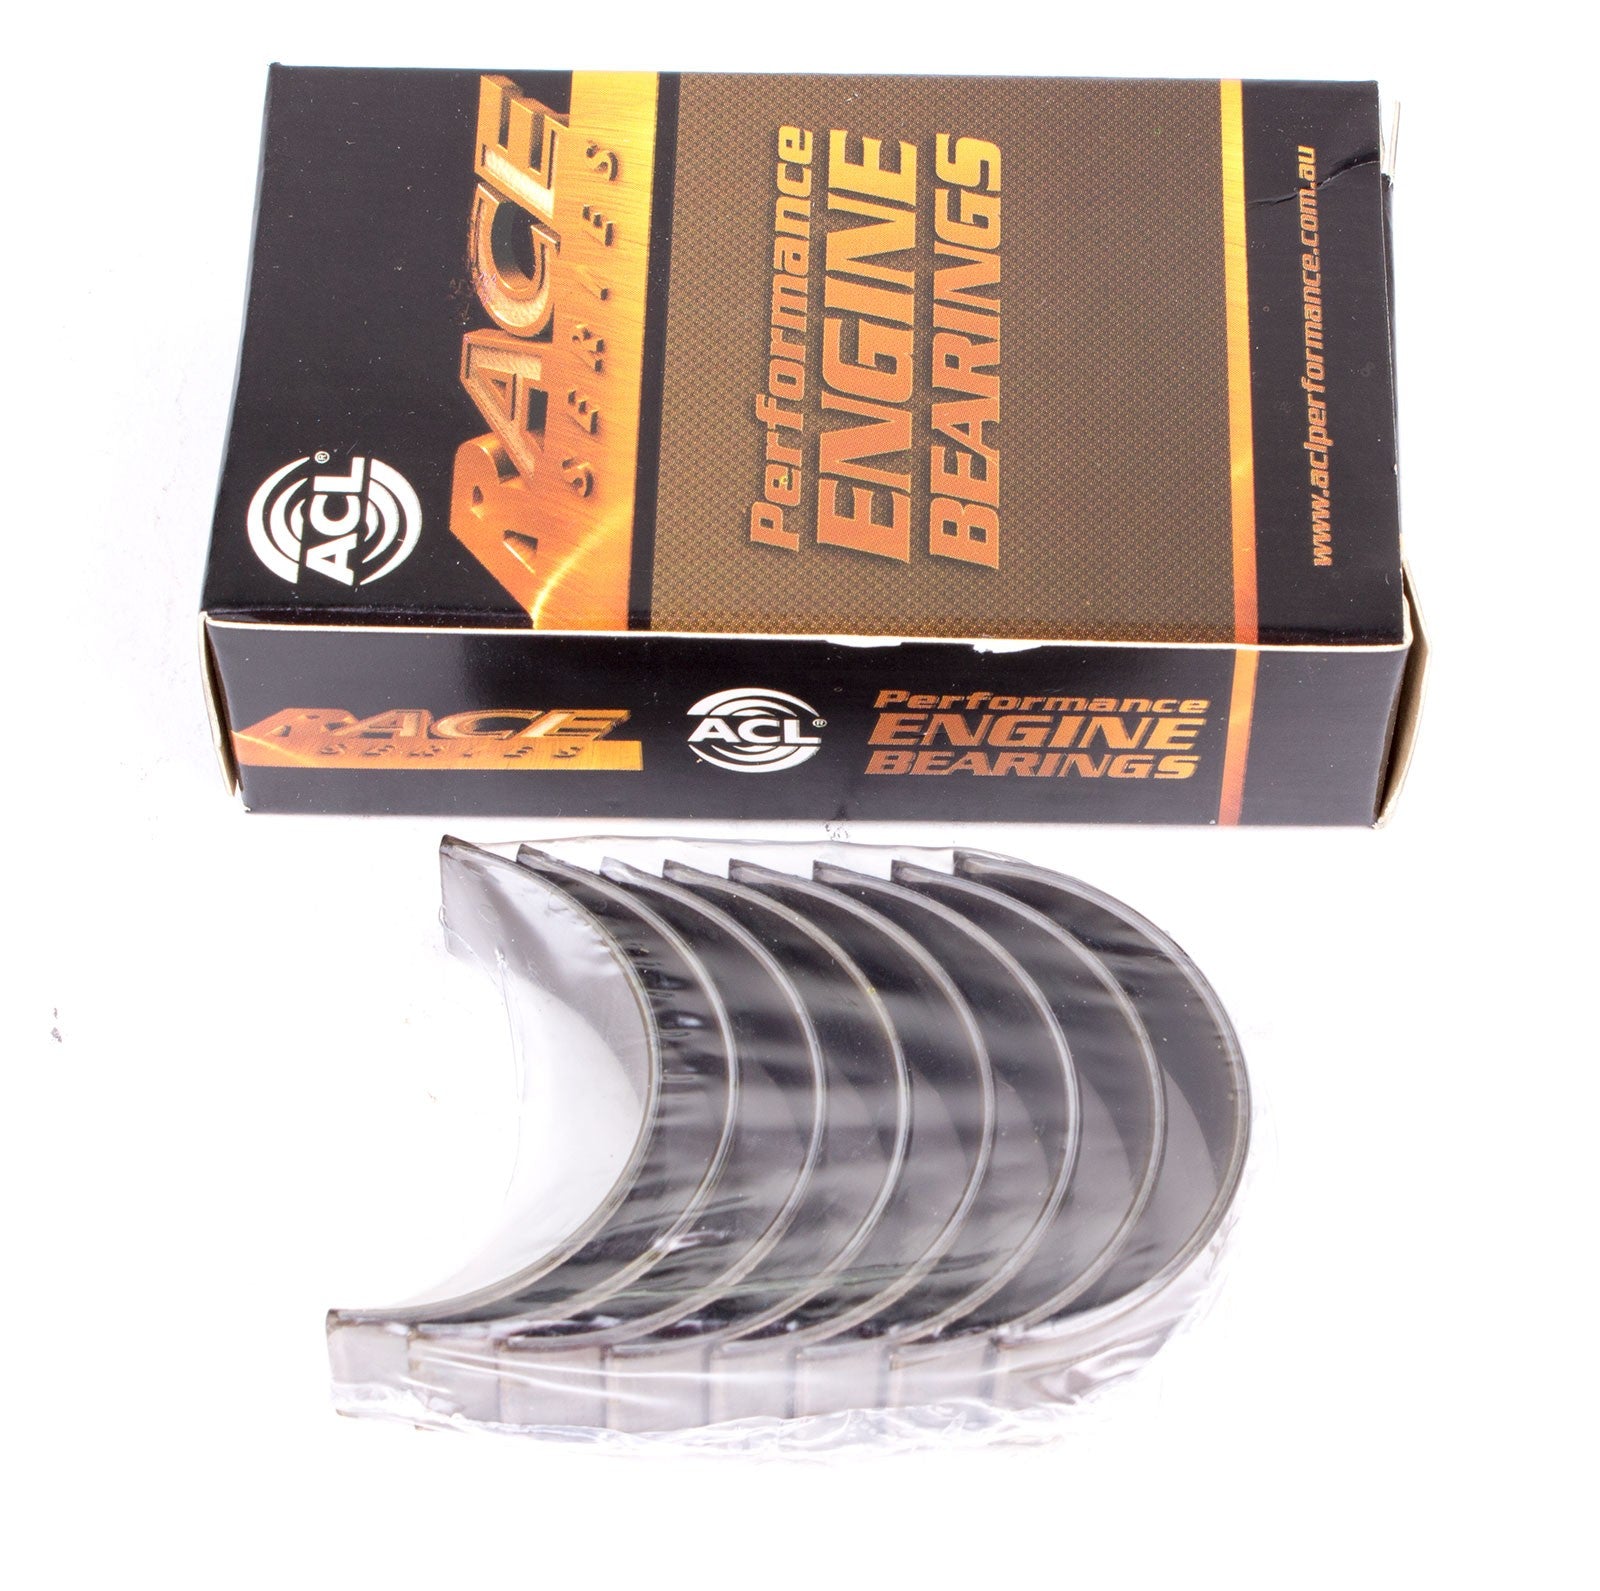 ACL 5M909H-11 Main bearing set (ACL Race Series) Photo-0 